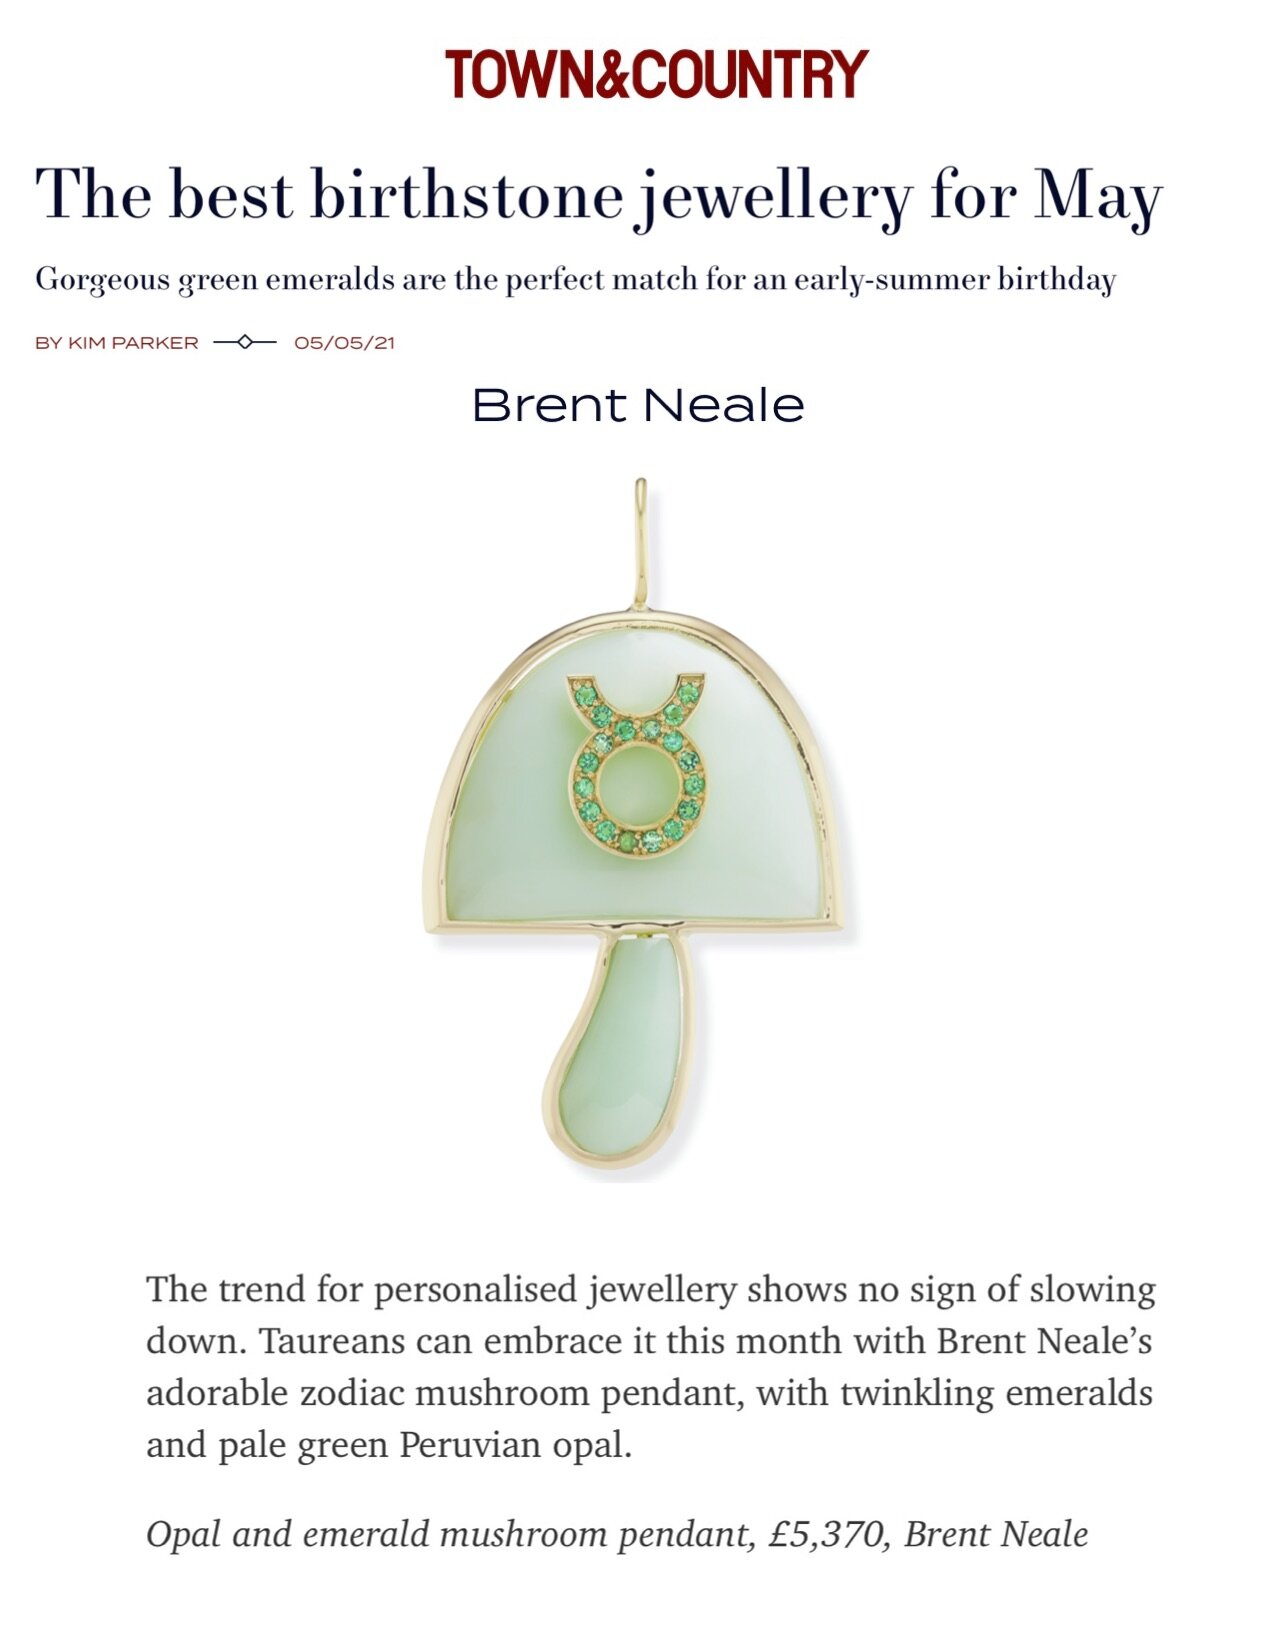 Brent Neale on TownandCountry.co.uk, May 2021